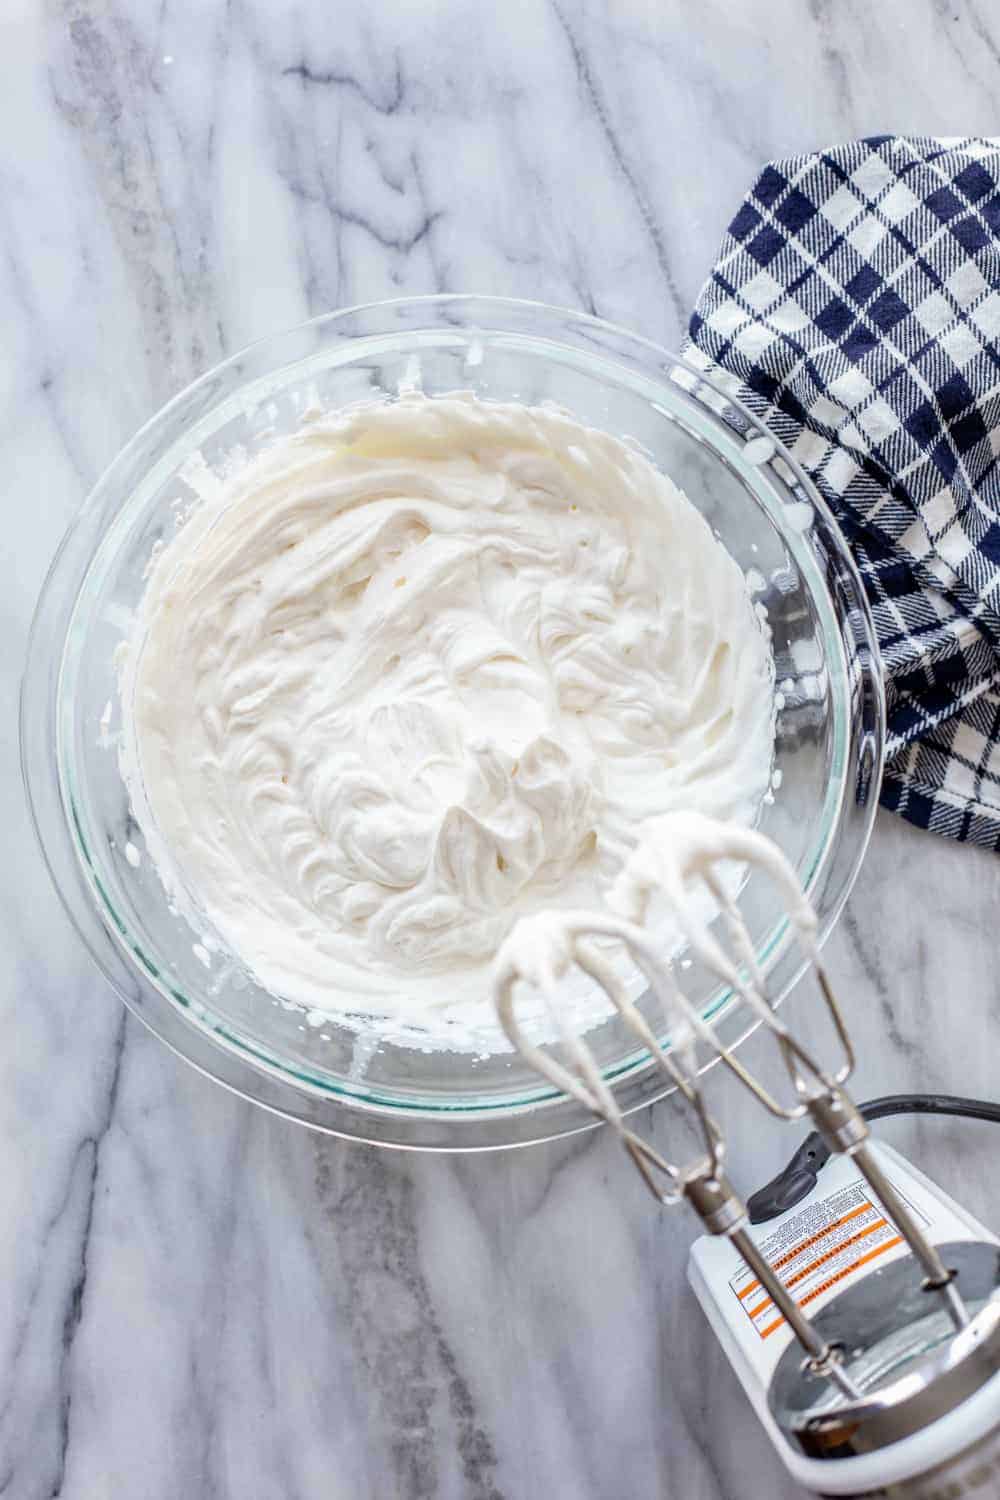 Glass mixing bowl of freshly whipped cream next to a hand mixer